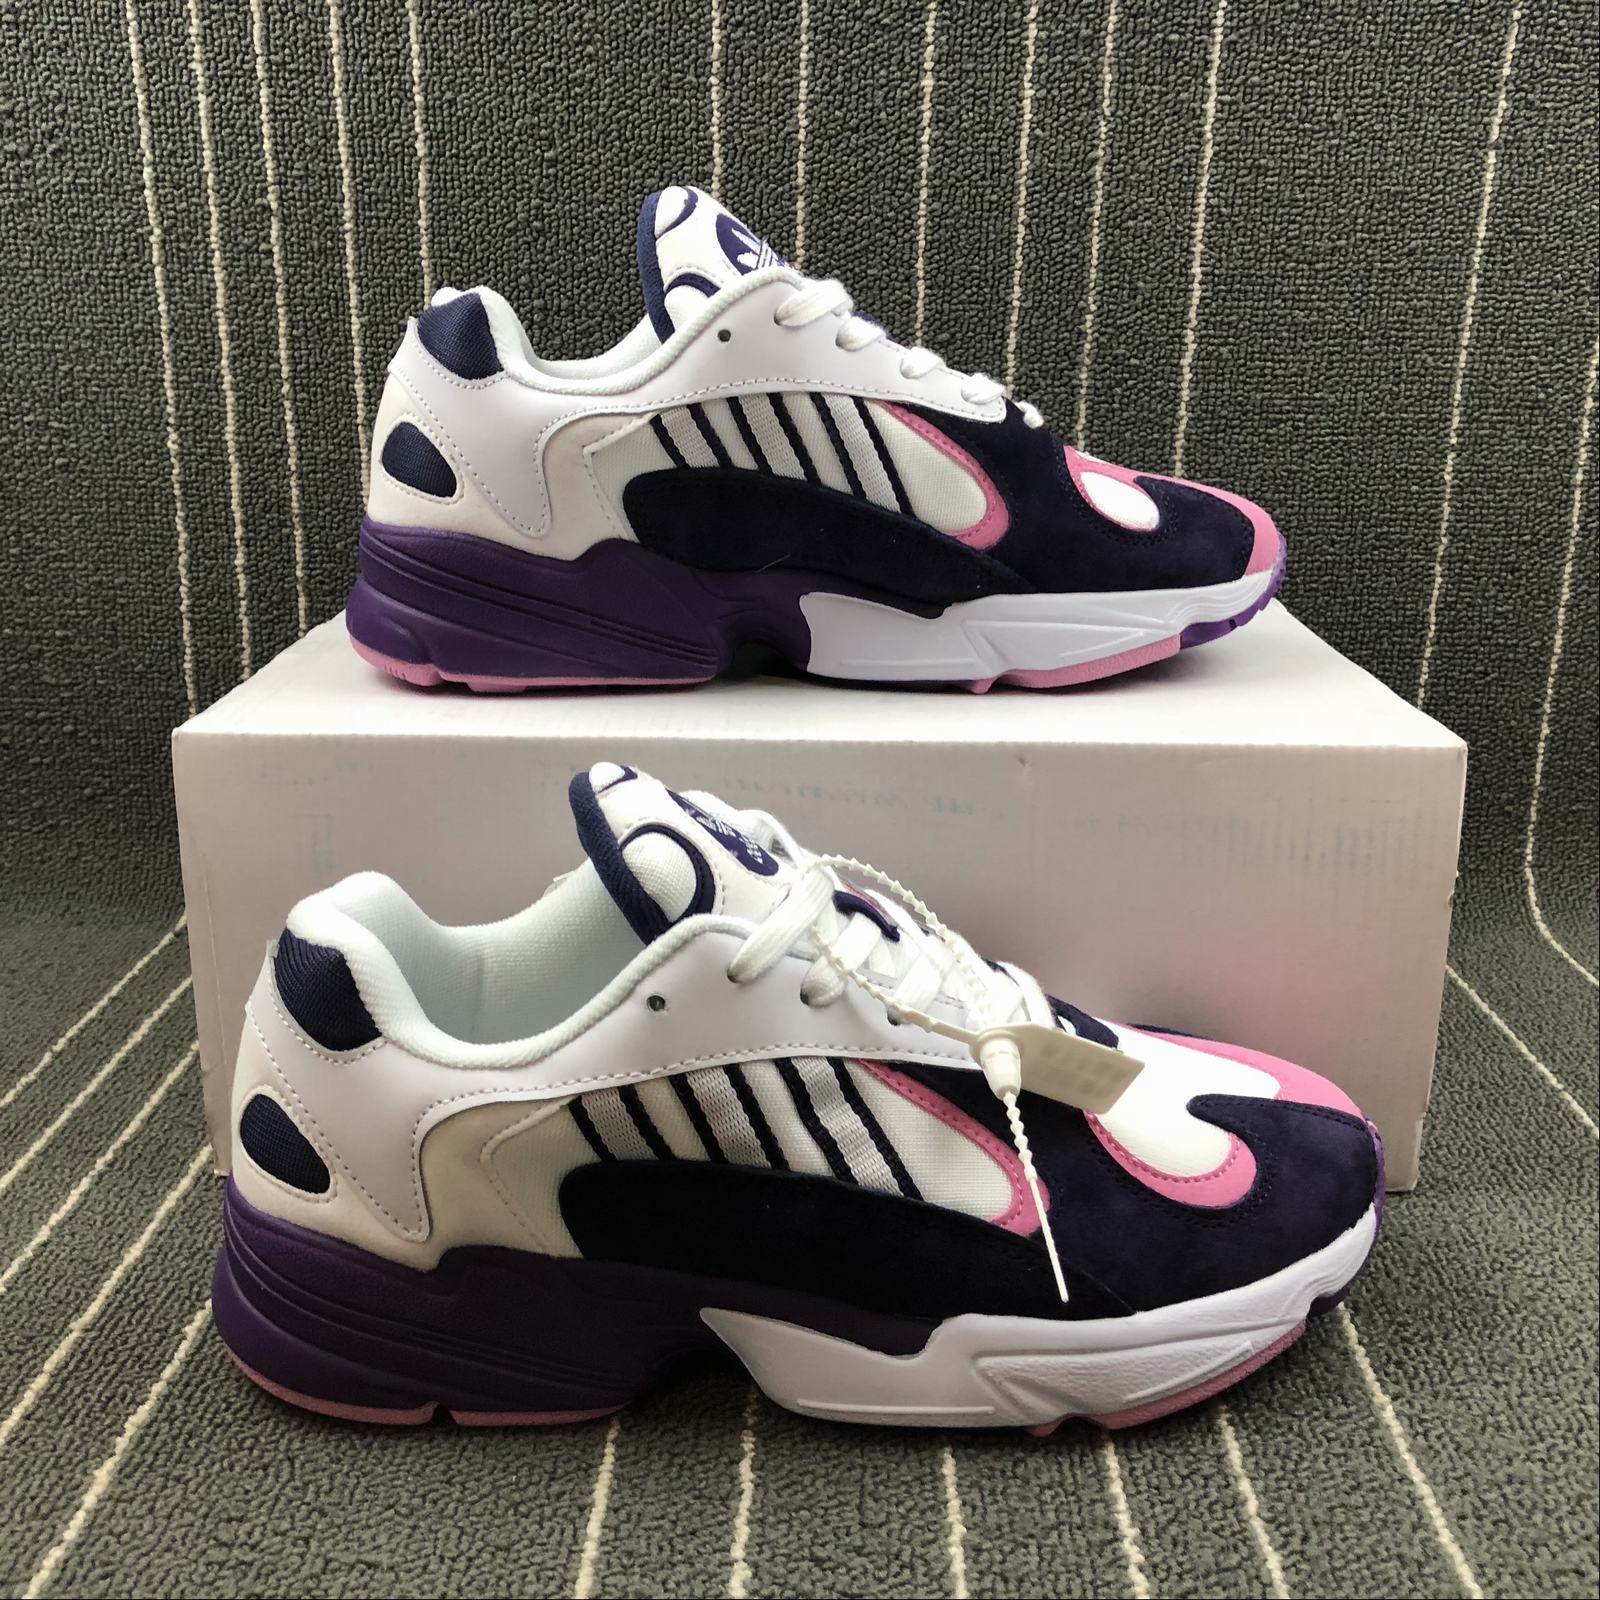 dragon ball z sneakers for sale